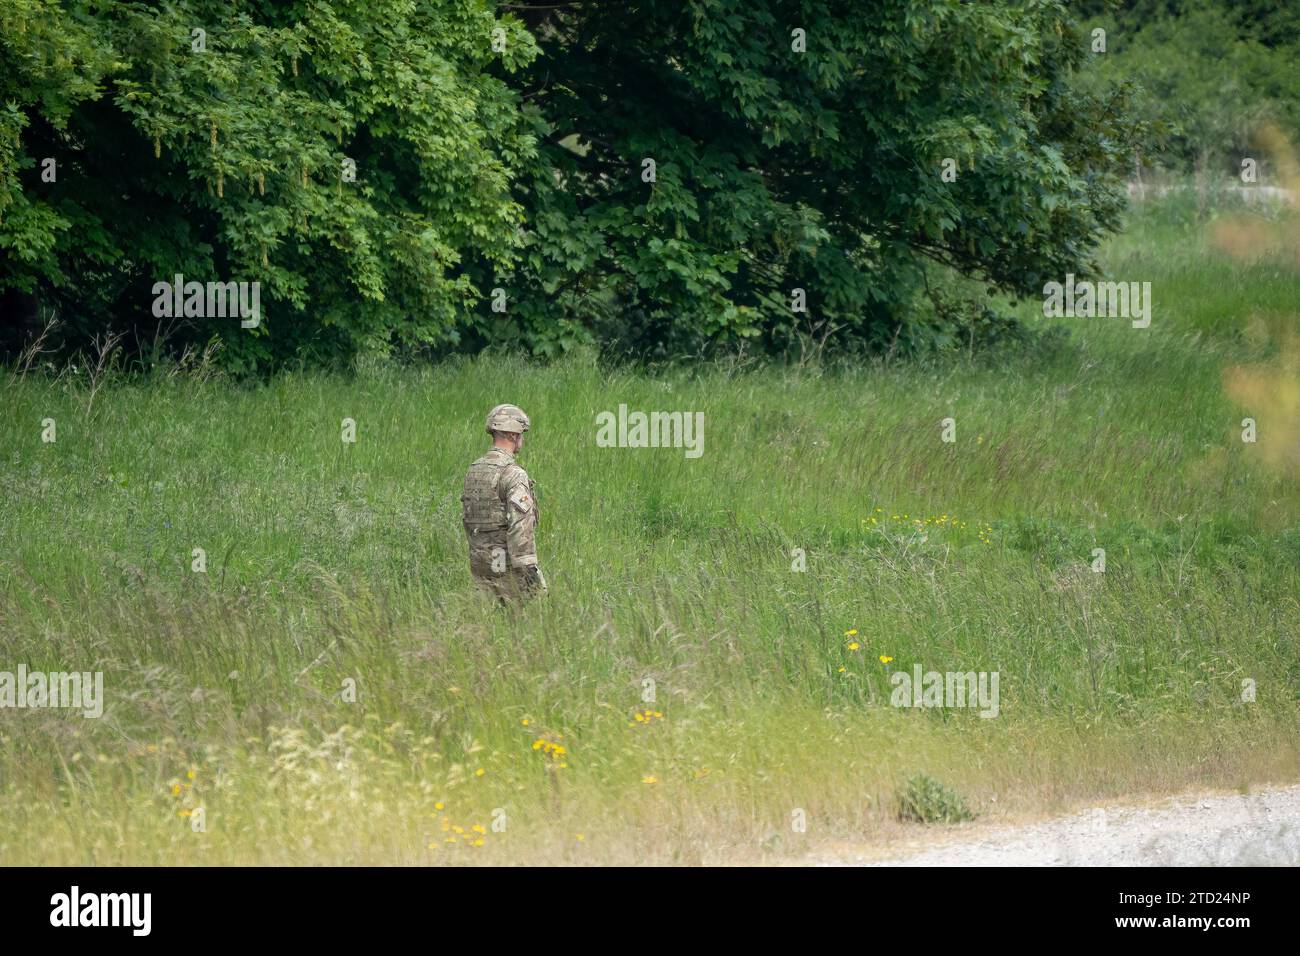 British army soldier moving through long grass Stock Photo